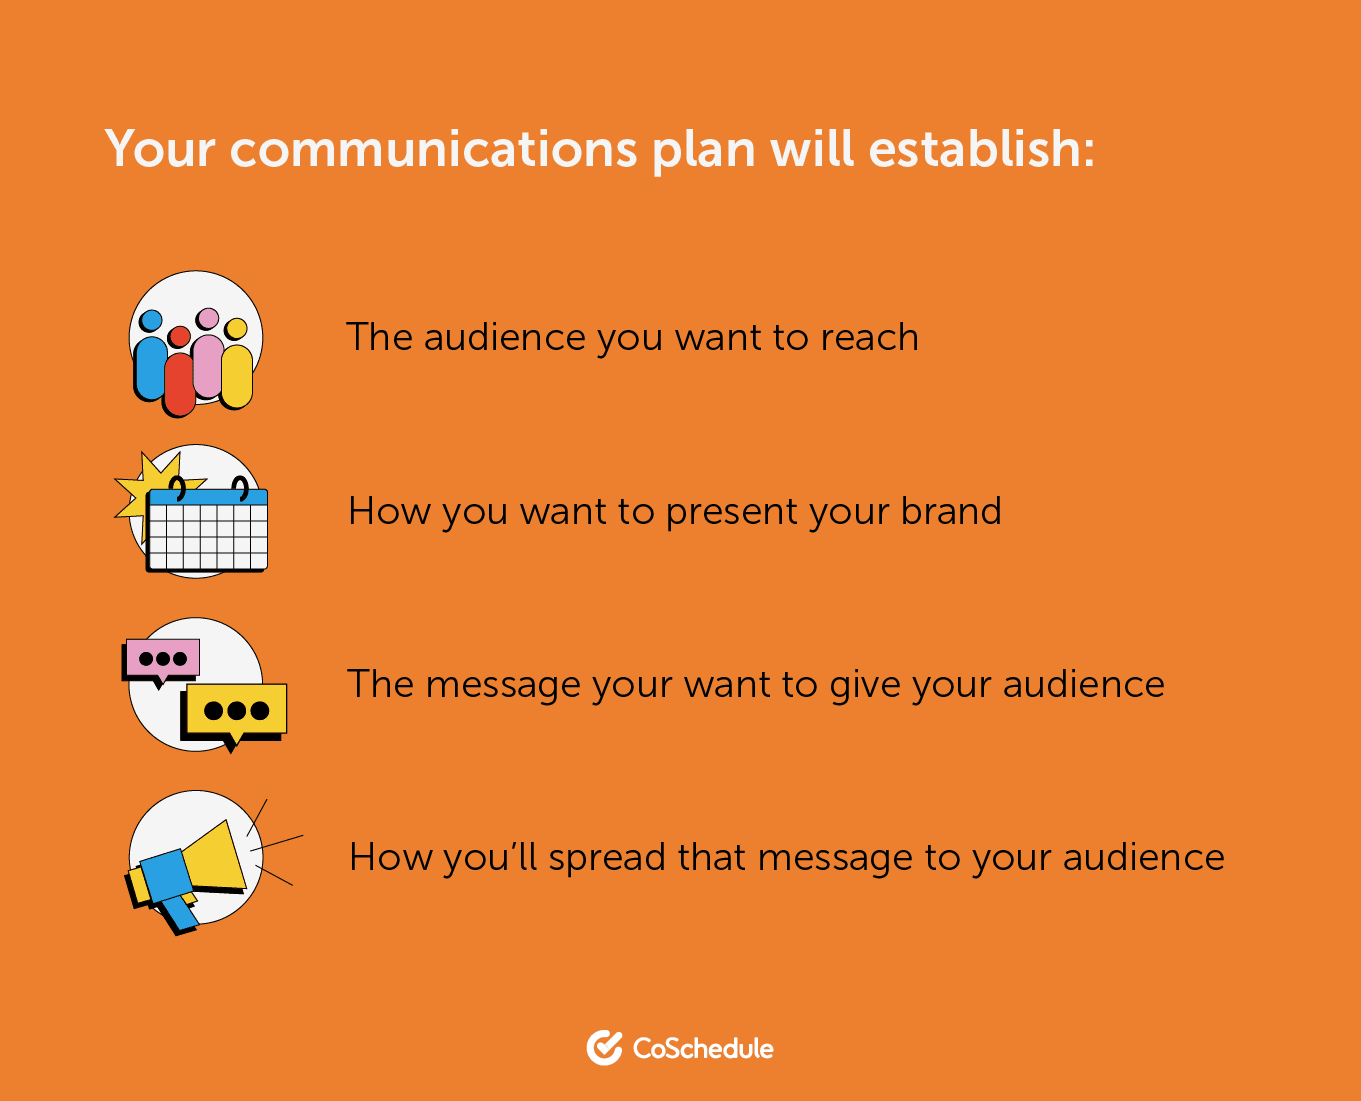 List of things a communications plan will be able to establish